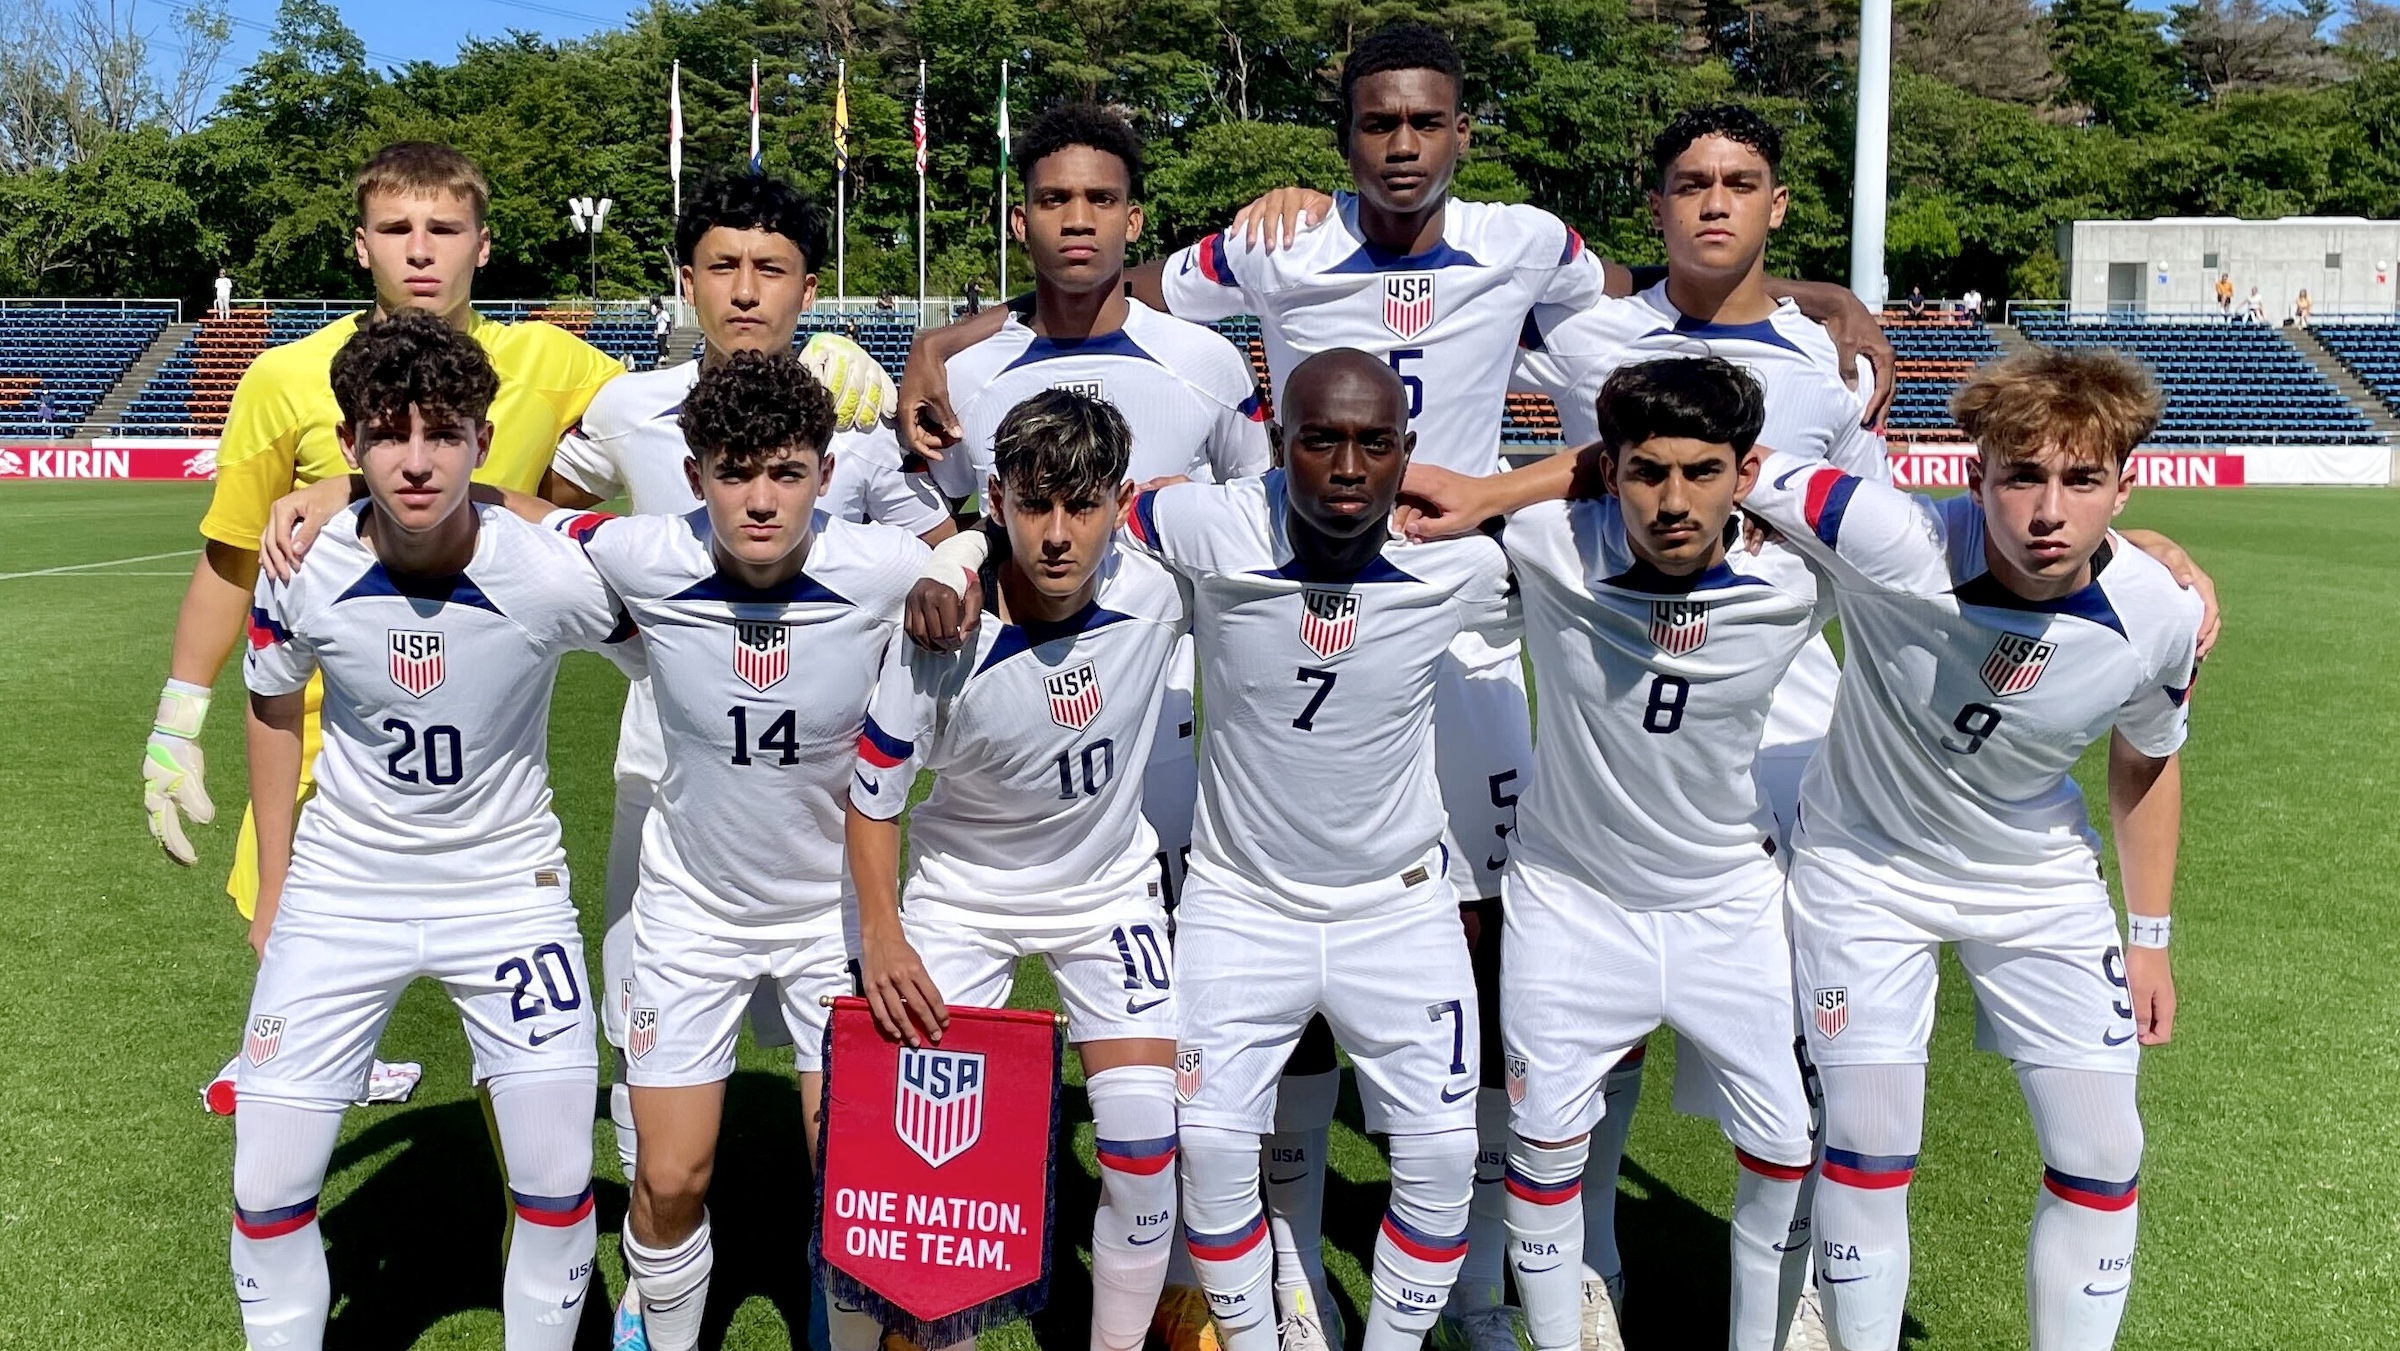 Five Things to Know About the Cuba U-17 MNT